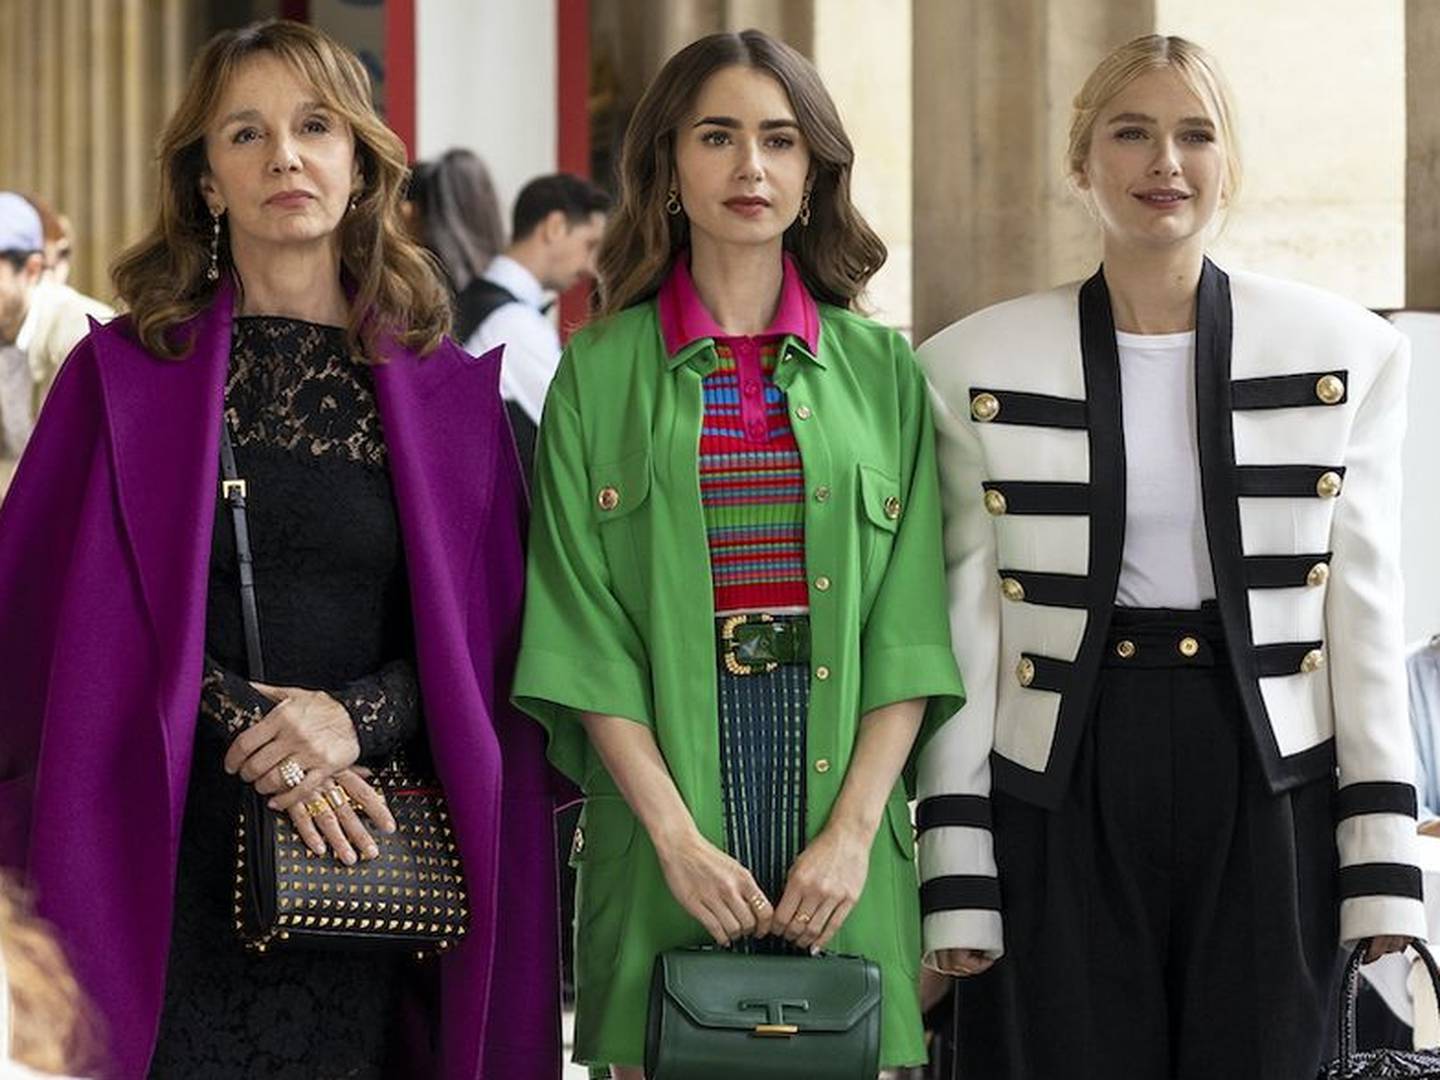 Lily Collins, centre, as Emily Cooper in 'Emily in Paris', wears a green jacket by Lebanese designer Elie Saab in season two. Photo: Netflix